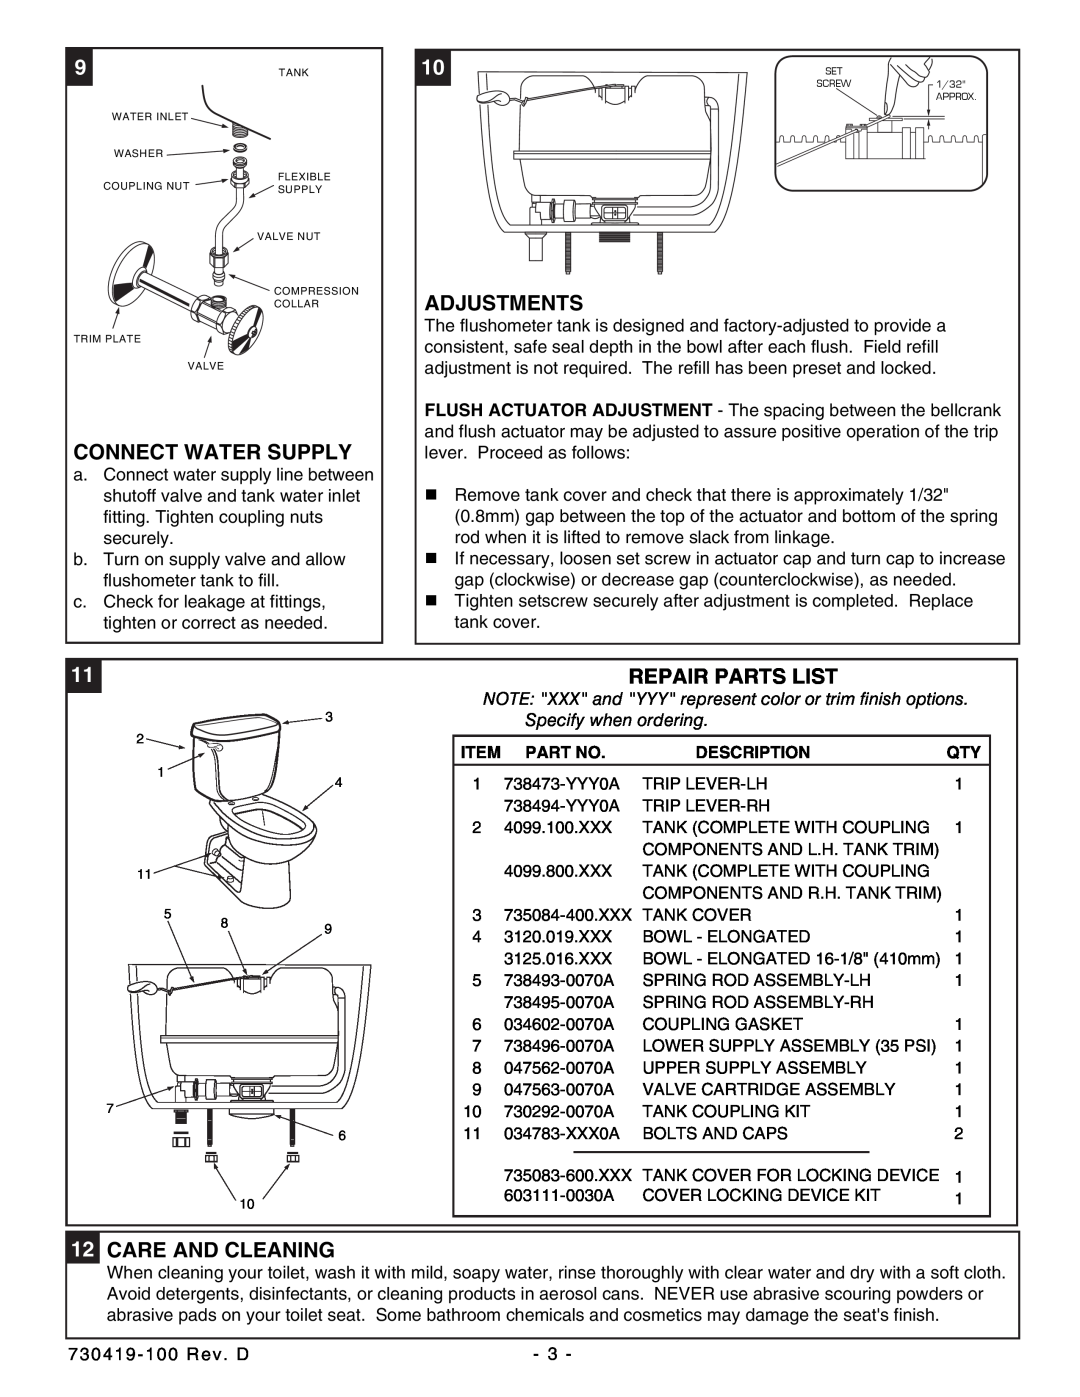 American Standard 2325 Elongated Connect Water Supply, Adjustments, Repair Parts List, 12CARE AND CLEANING, Description 